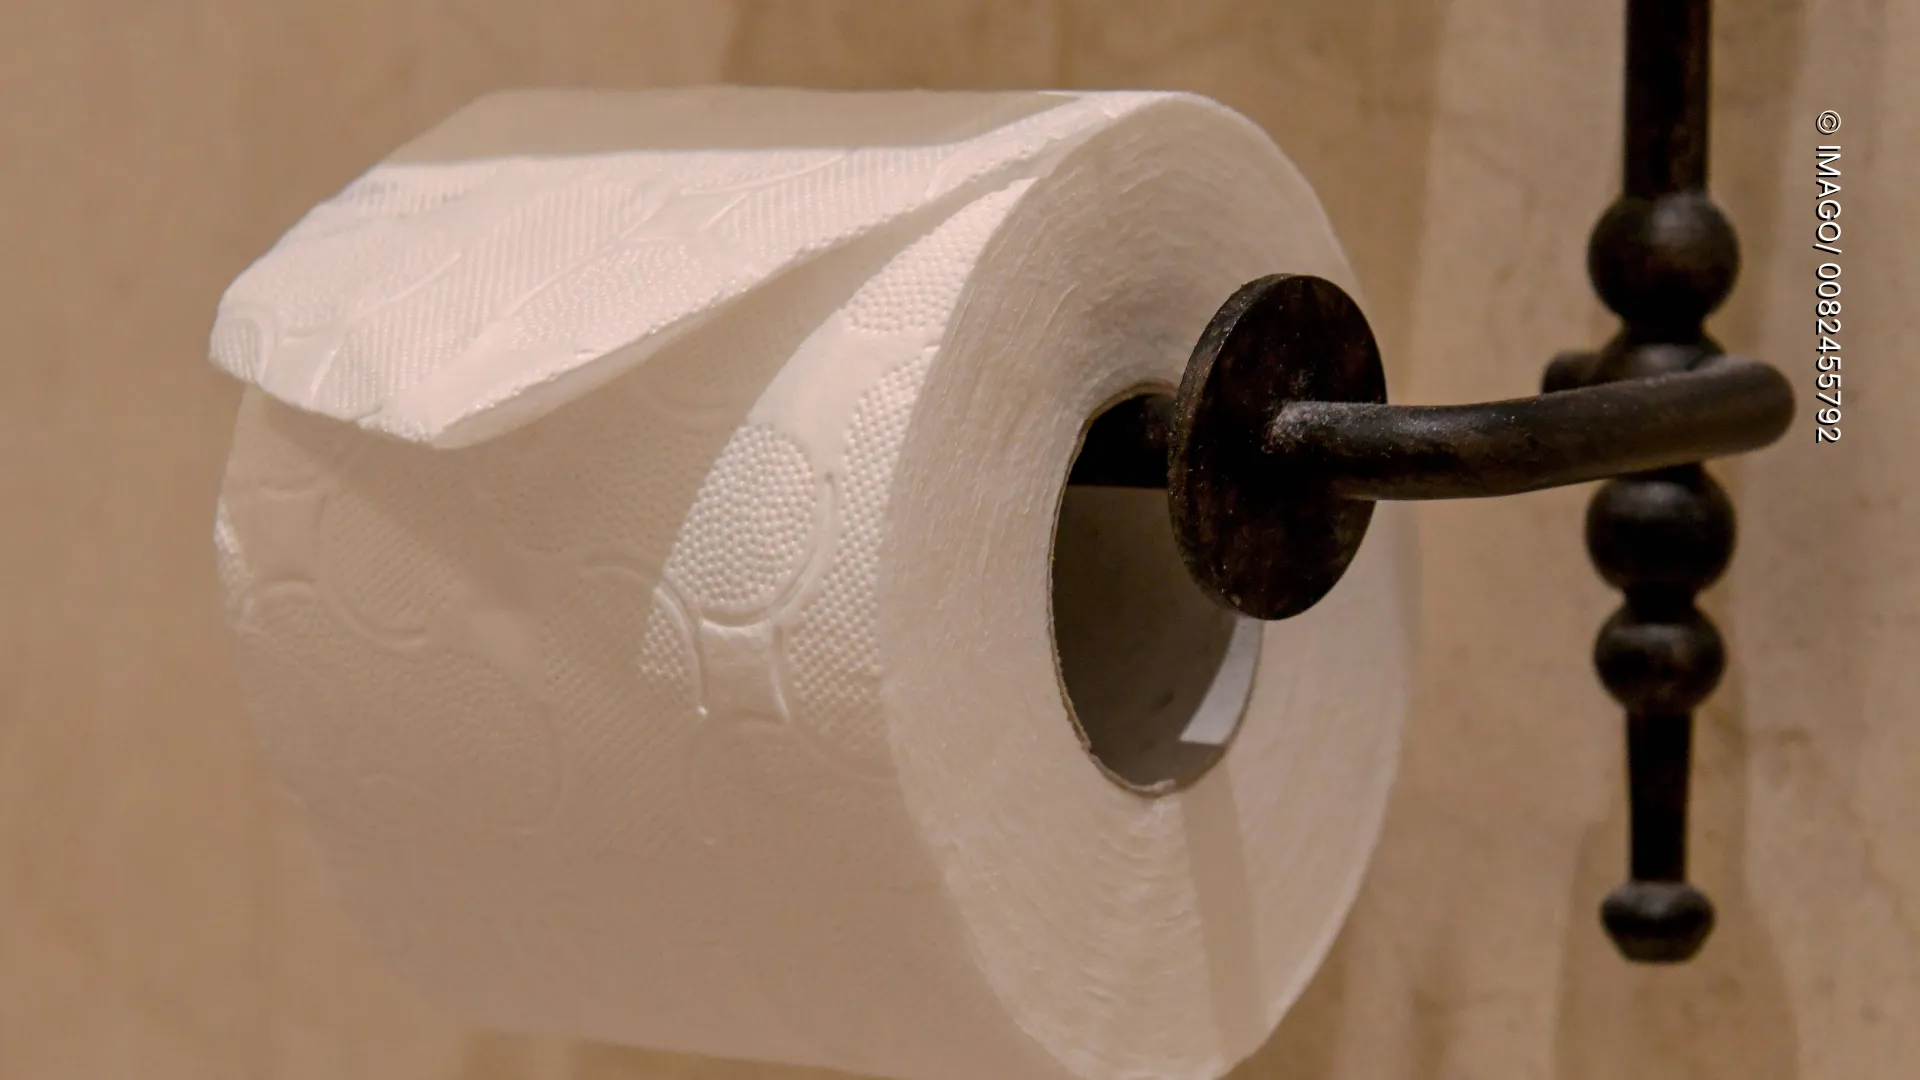 Chambermaid warns: Never use folded toilet paper in the hotel room